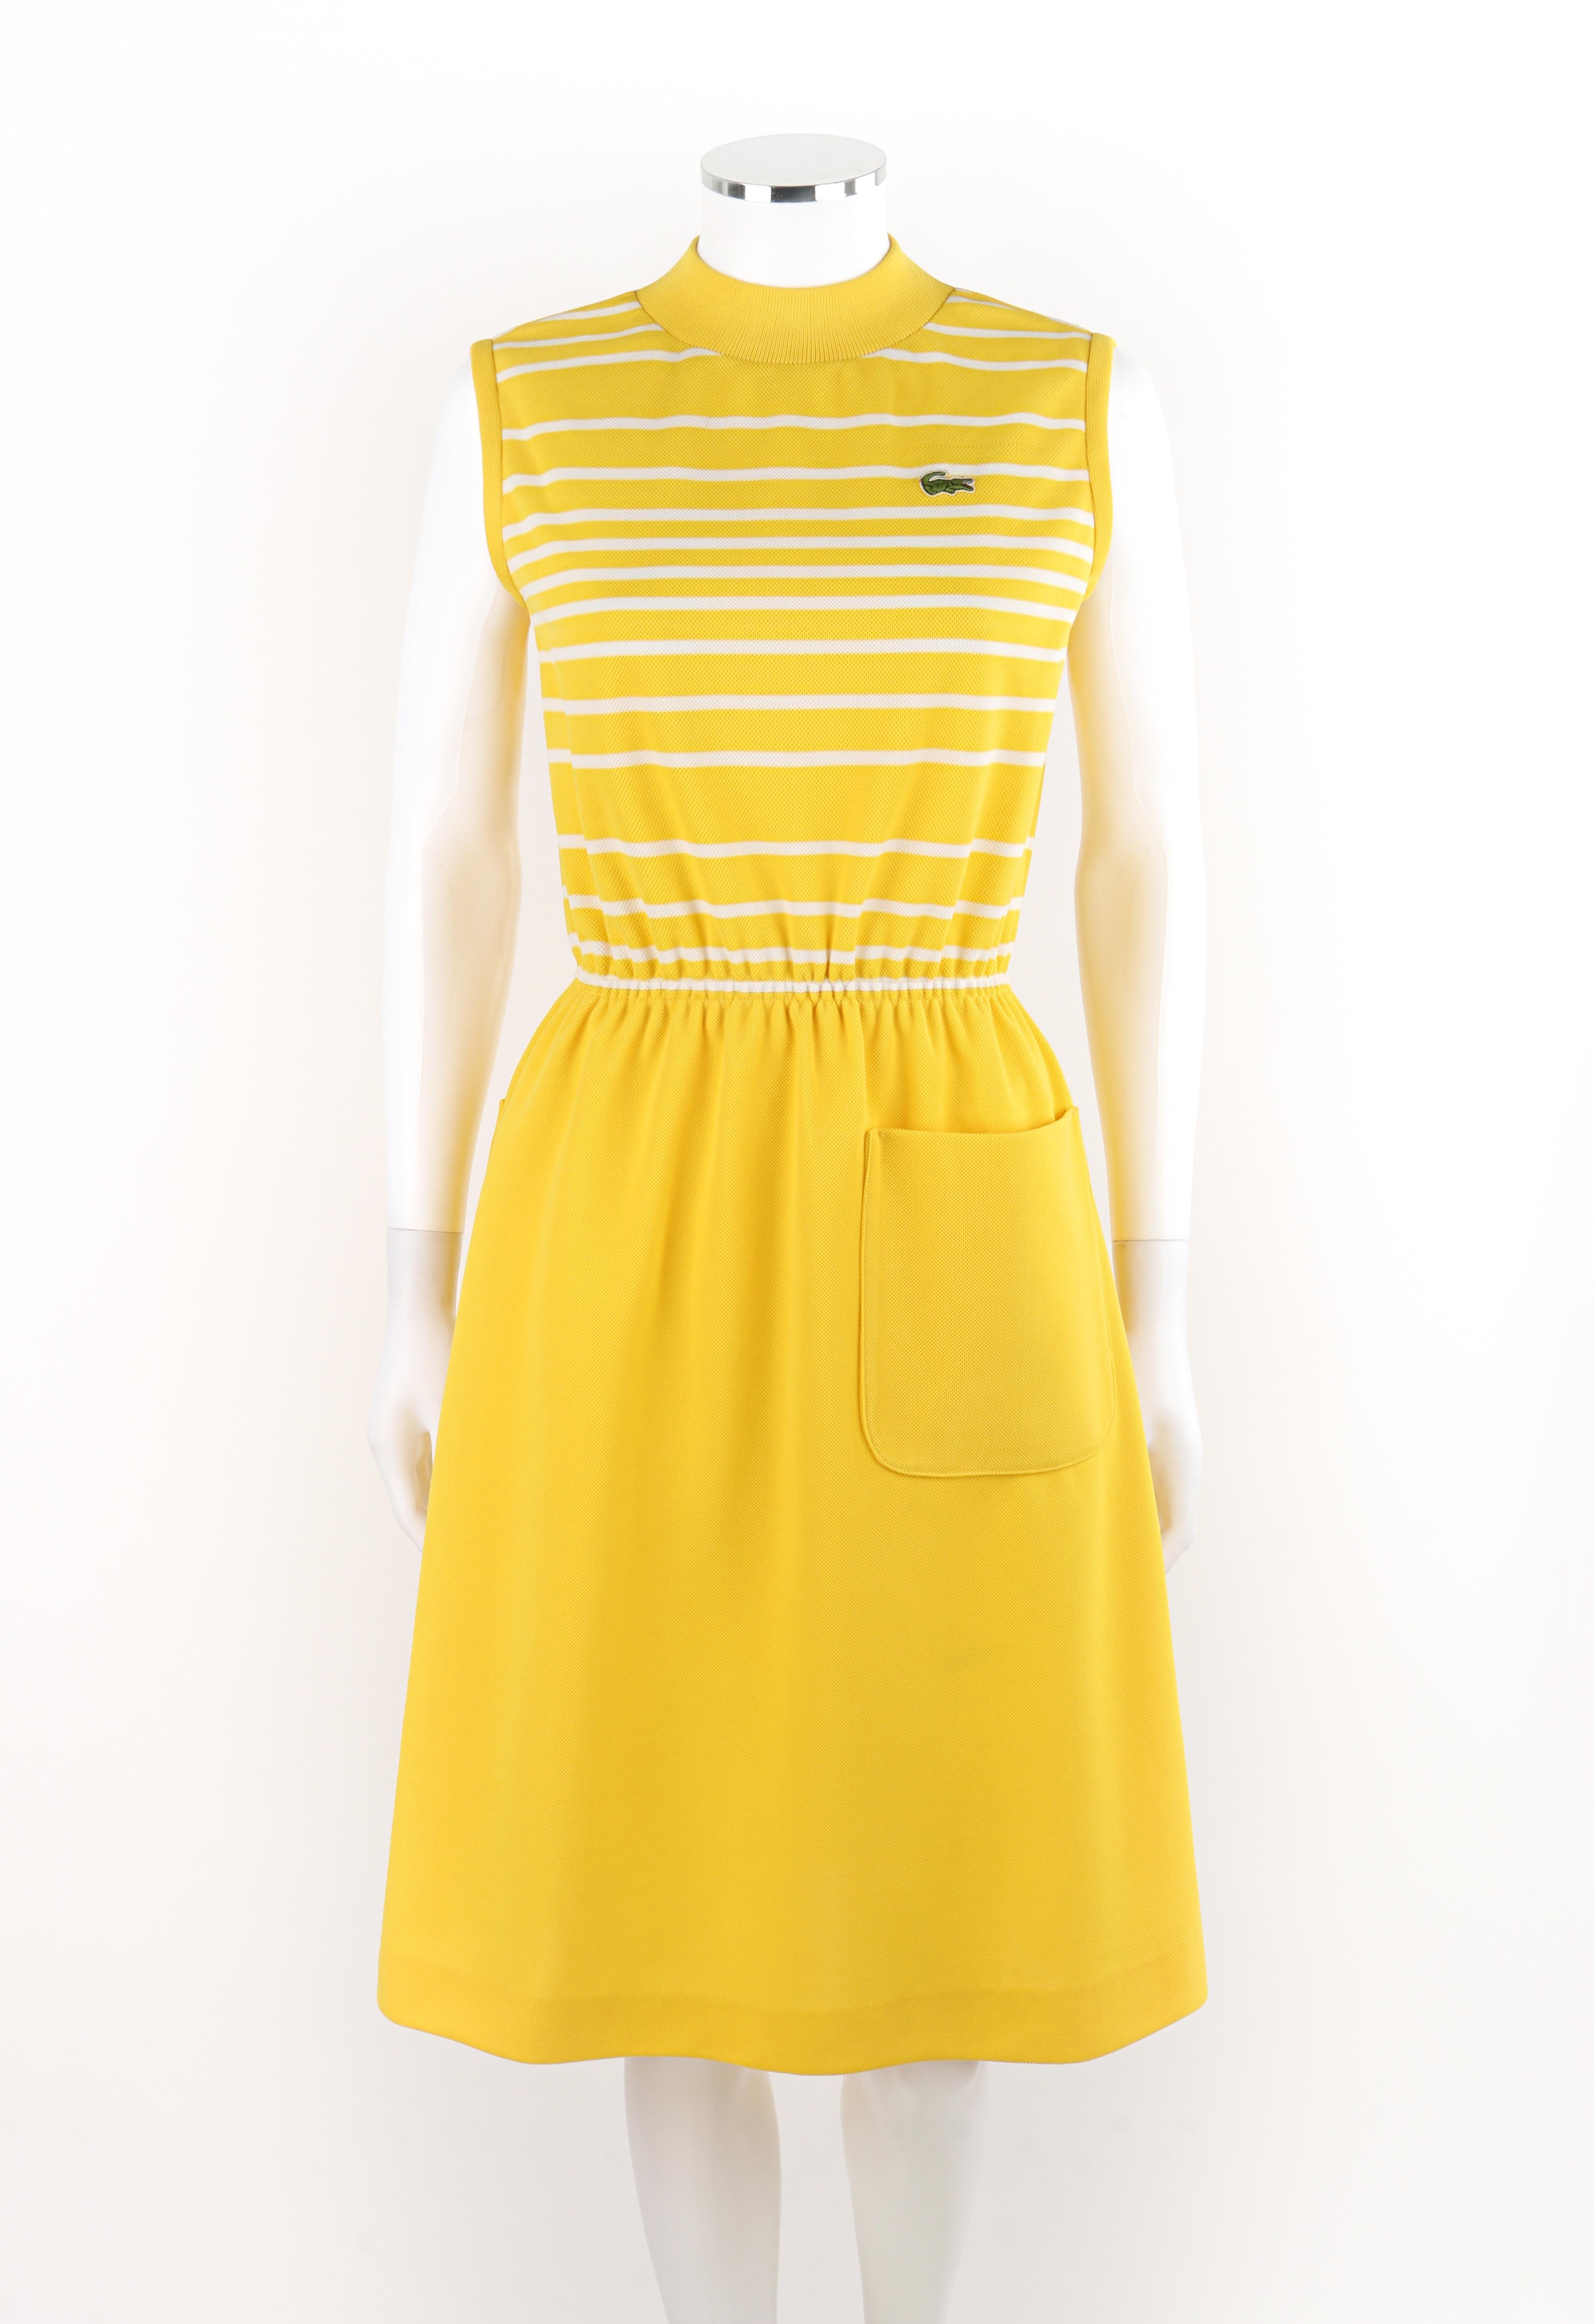 DAVID CRYSTAL LACOSTE c.1960's Yellow White Striped Knee Length Polo Sport Dress

Brand / Manufacturer: David Crystal, Lacoste
Circa: 1960's
Designer: Jean Patou
Style: Polo dress
Color(s): Shades of yellow, white, green
Lined: No
Unmarked Fabric